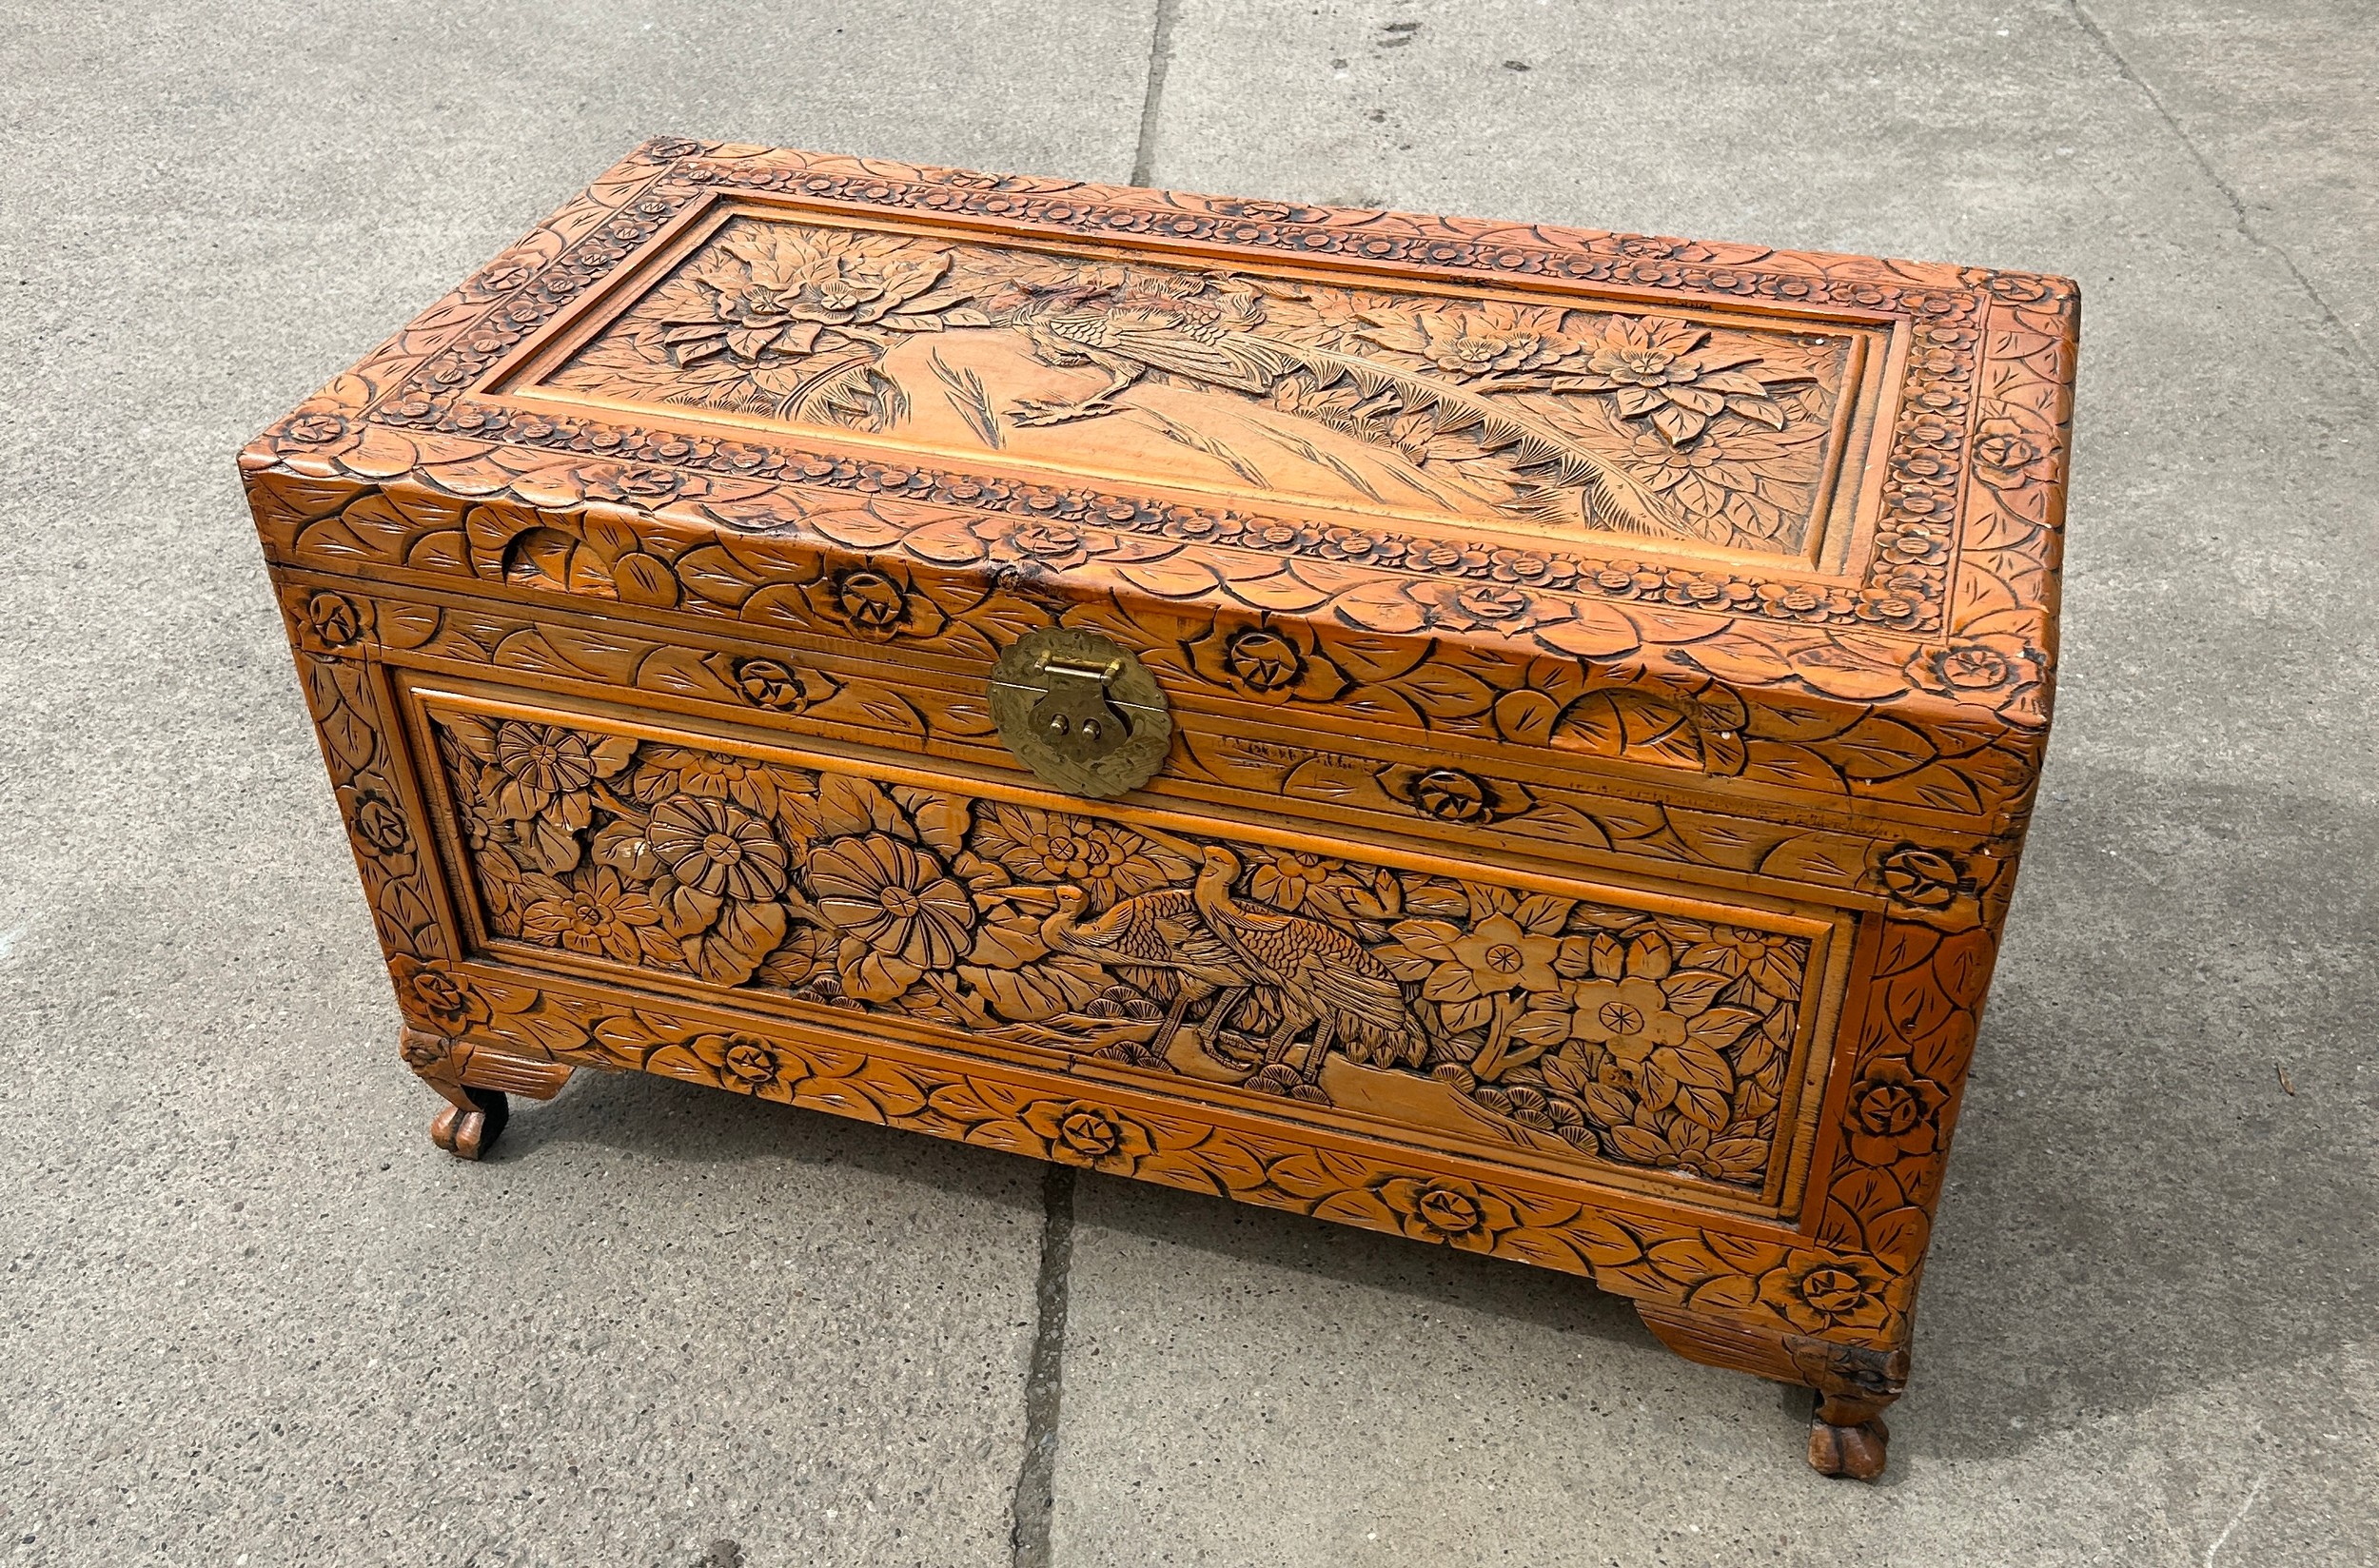 Carved oriental blanket box measures approx 23 inches tall, 40 wide and 21 deep